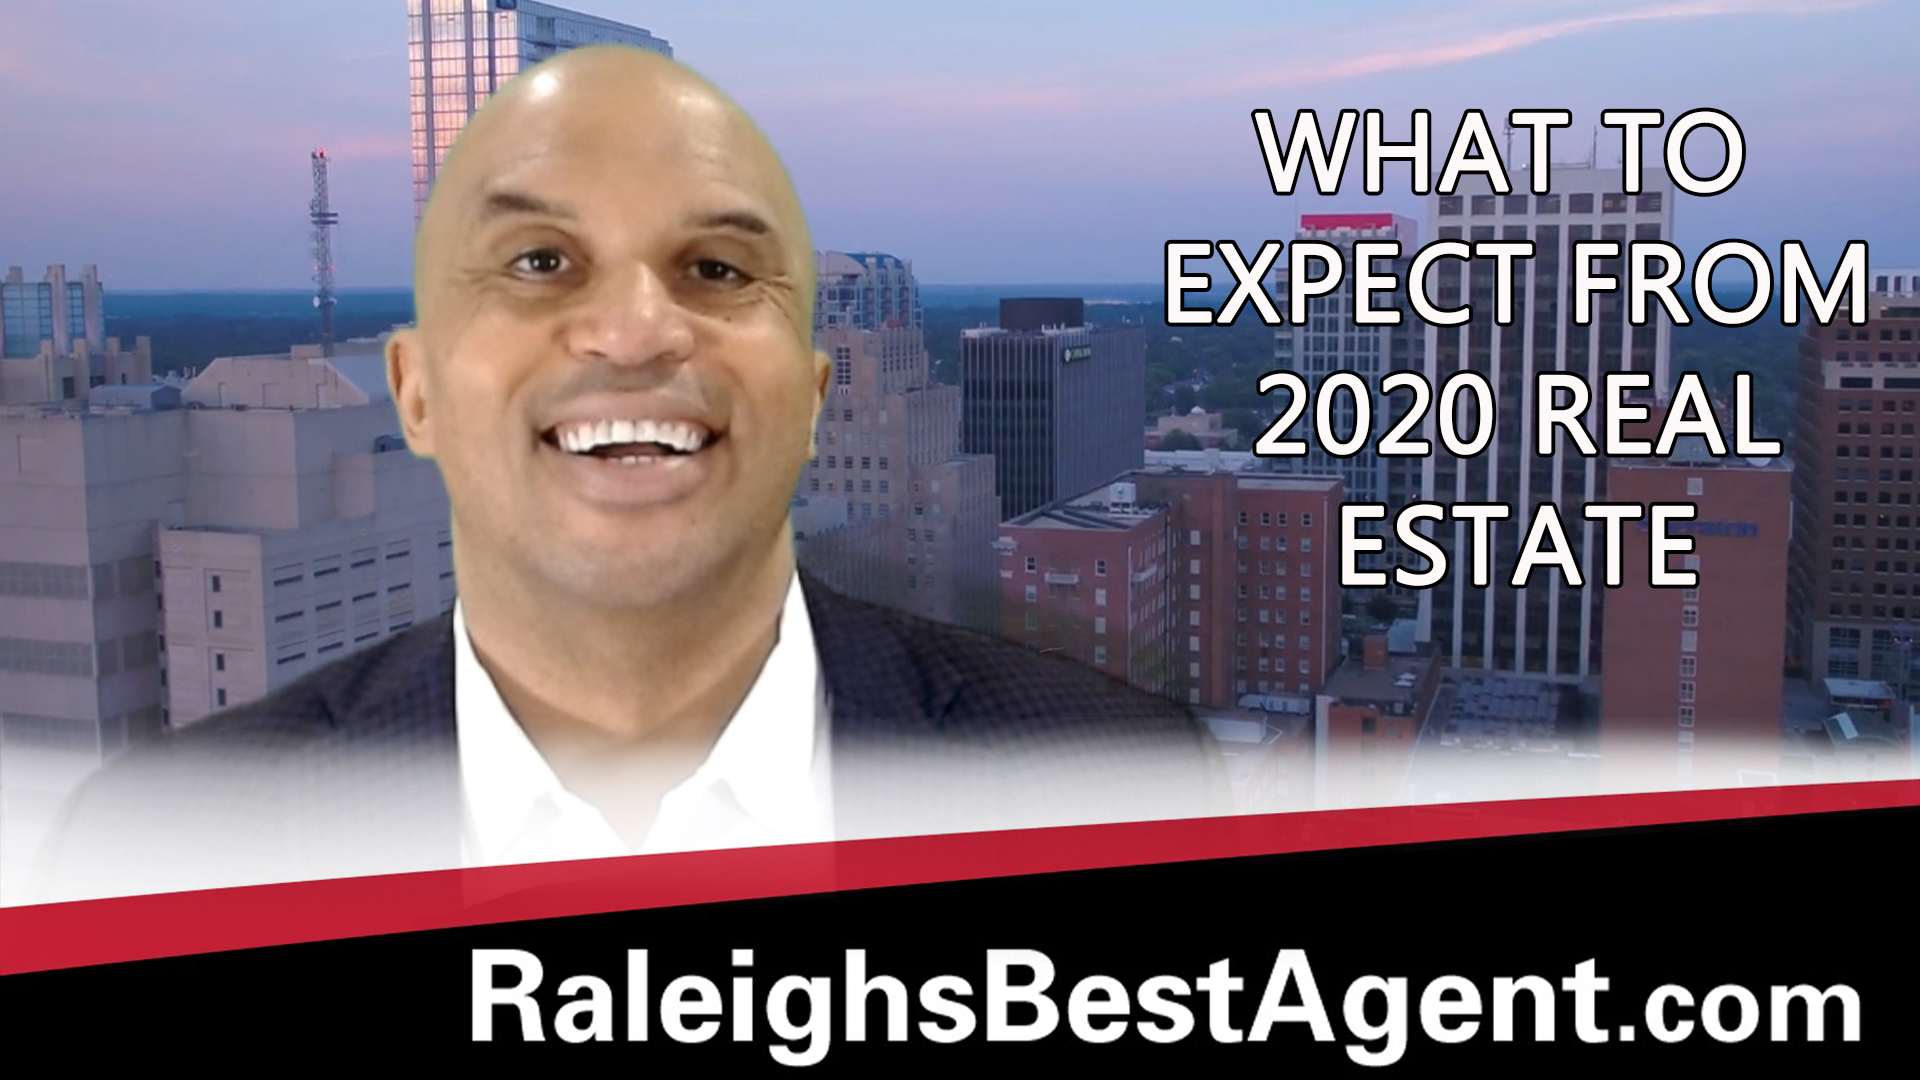 Our Predictions for Triangle Real Estate in 2020